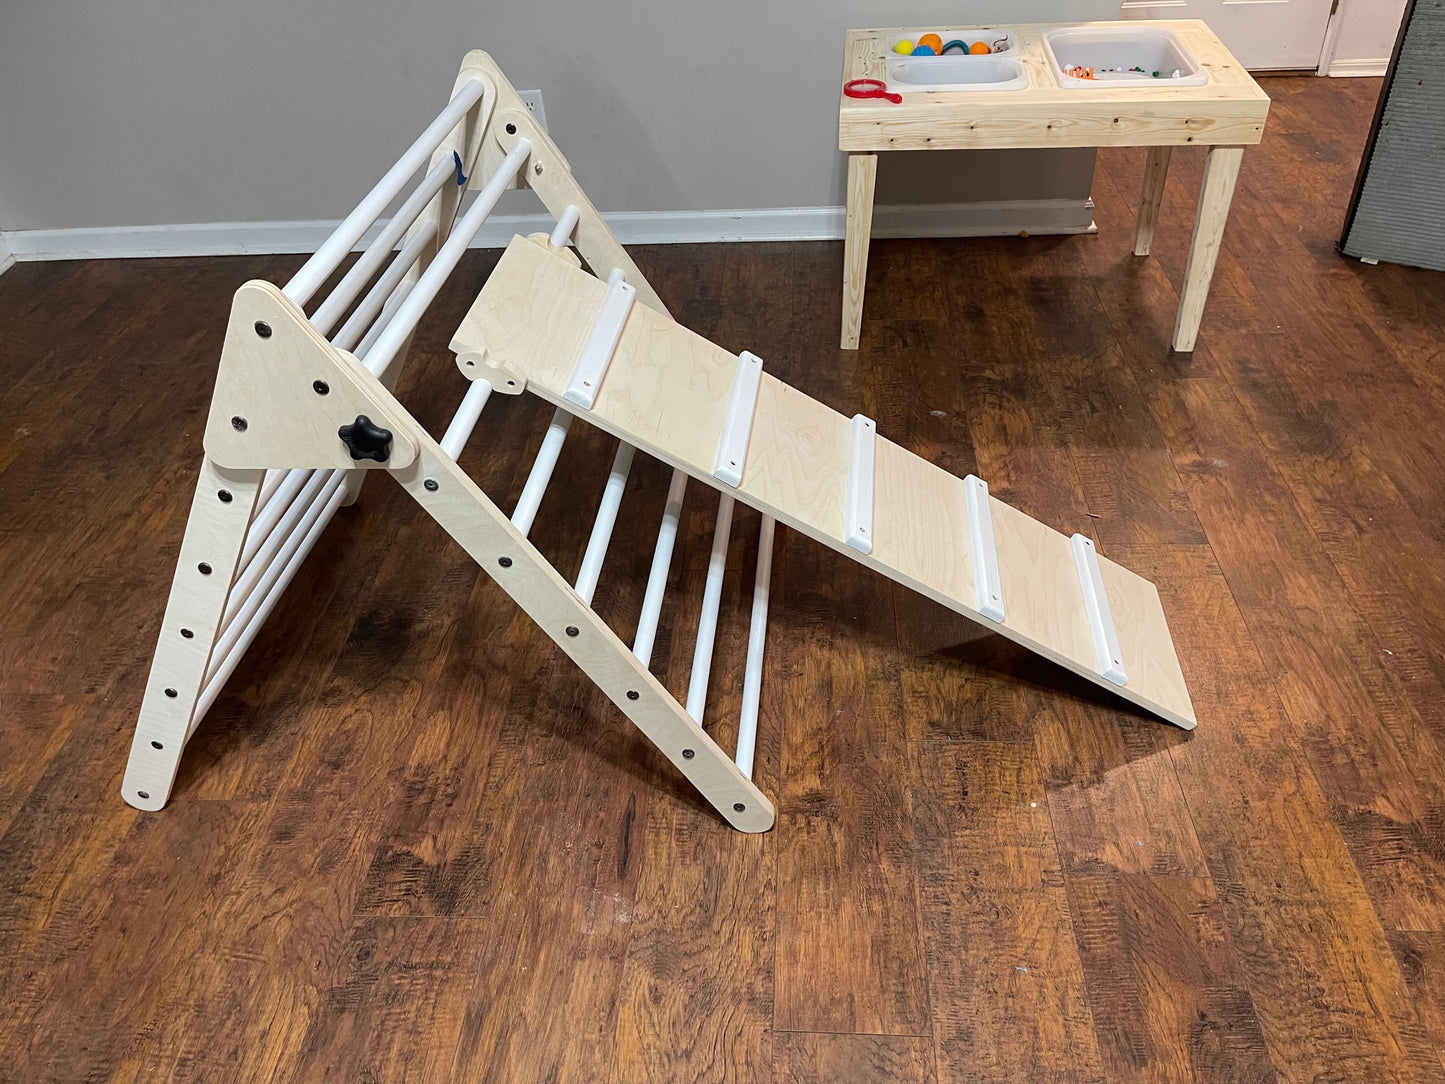 Large Pikler Triangle with Ramp/Slide